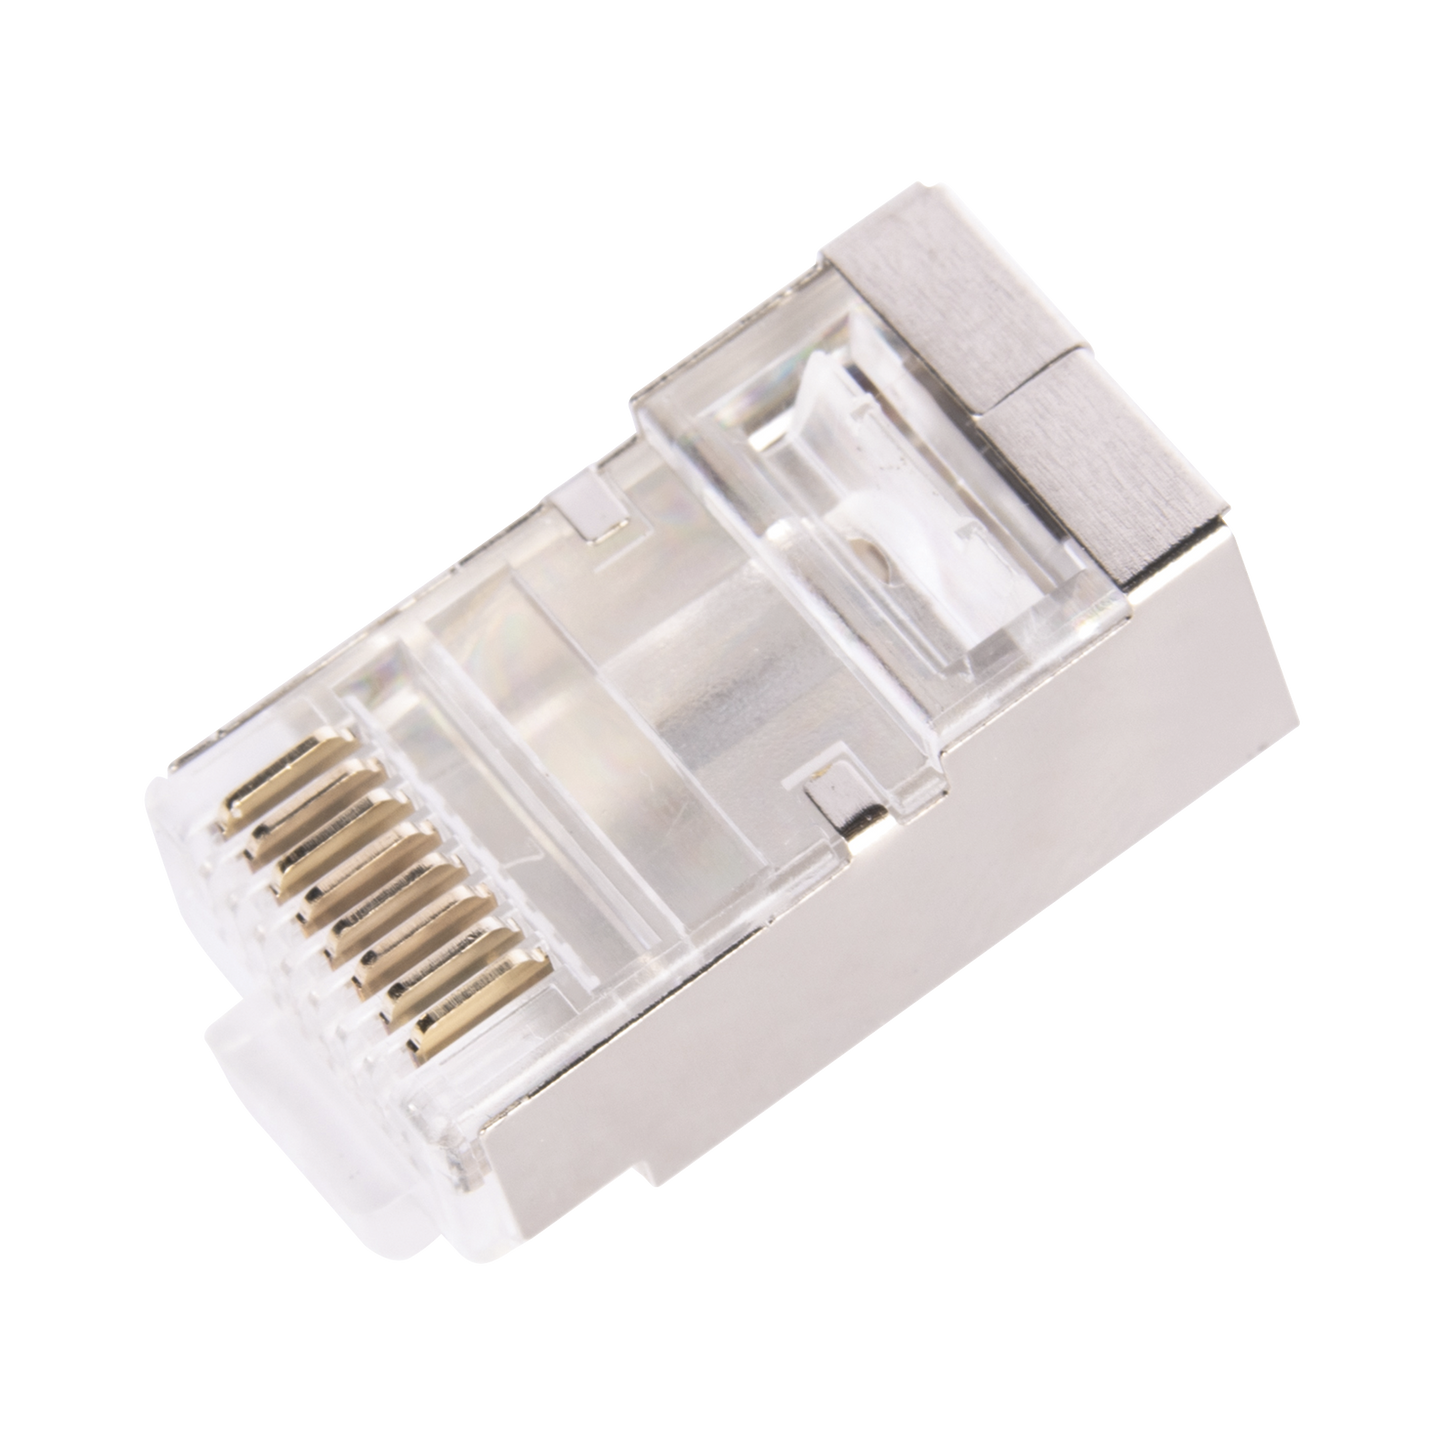 RJ45 Plug for Category 6 FTP/STP Cable - Shielded